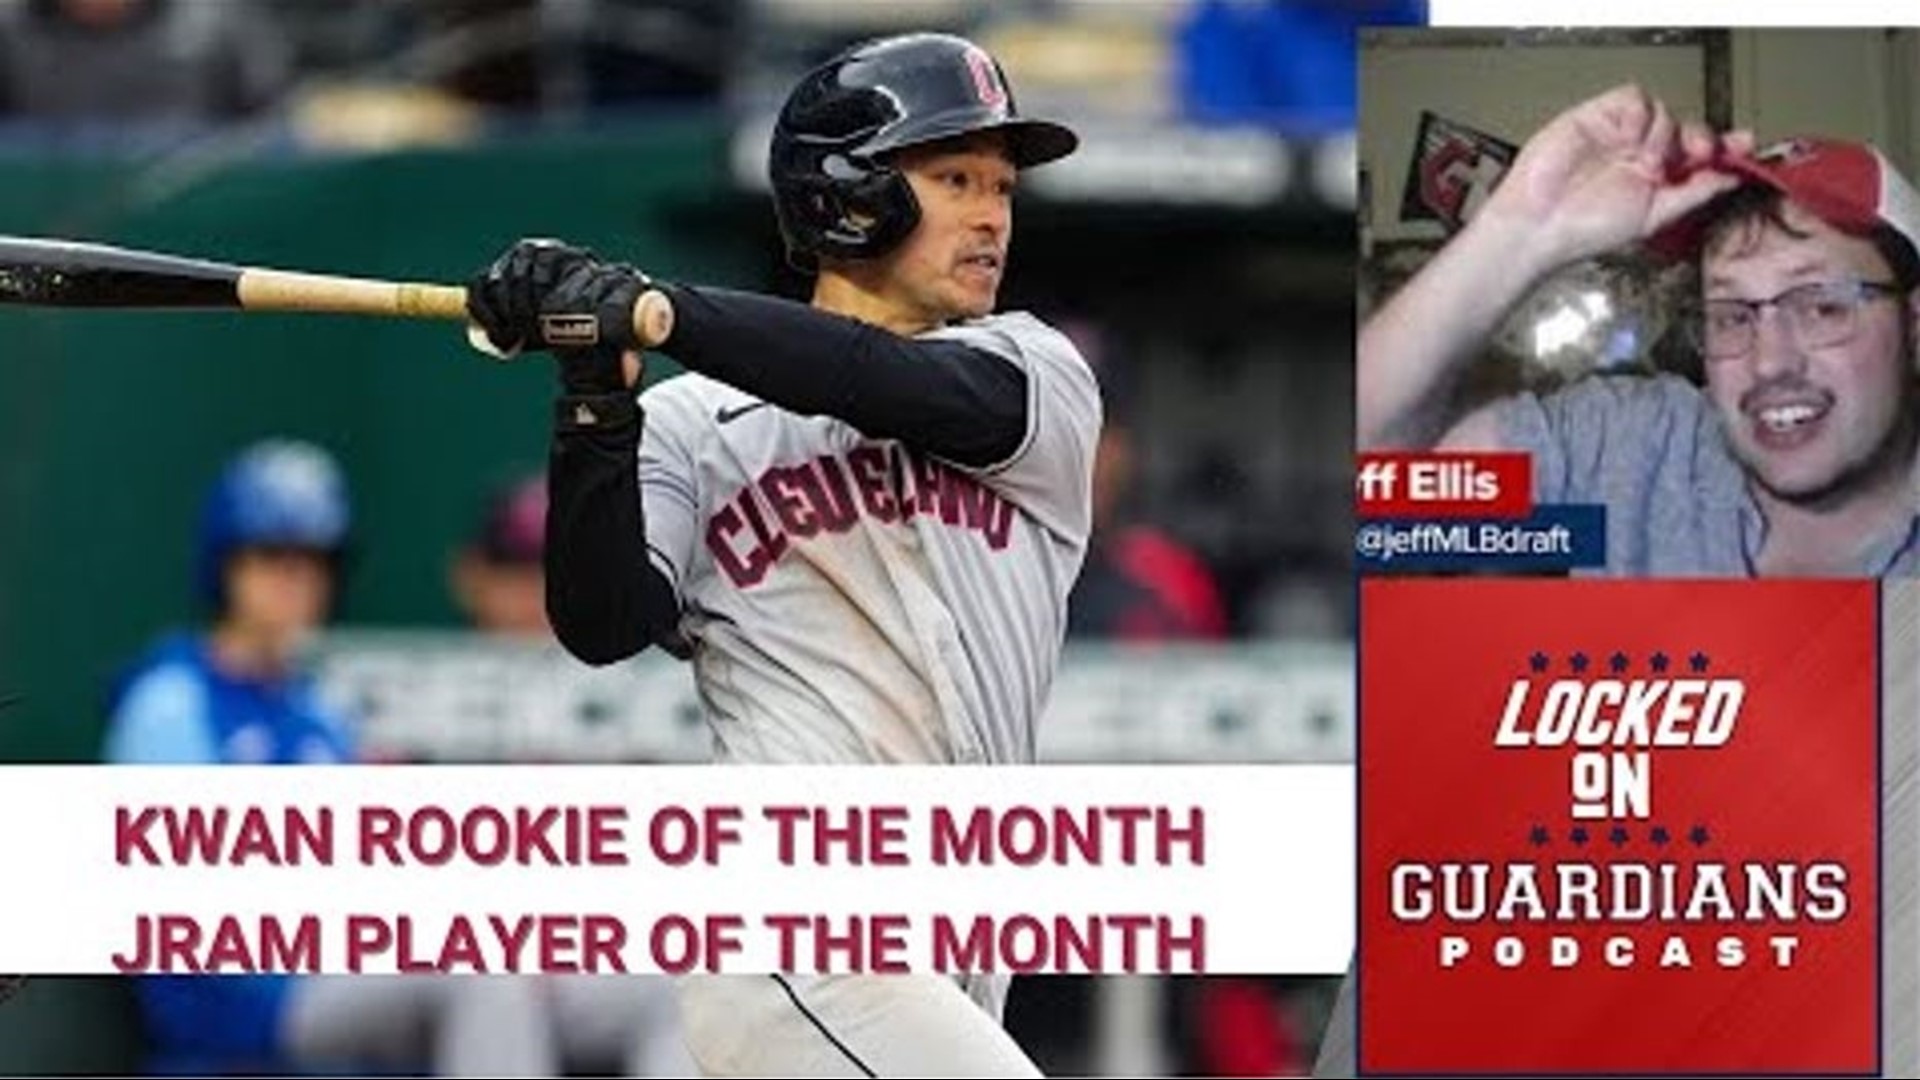 Jose Ramirez is the American League player of the month, no Guardian has won that award since Jose Ramirez in 2020.